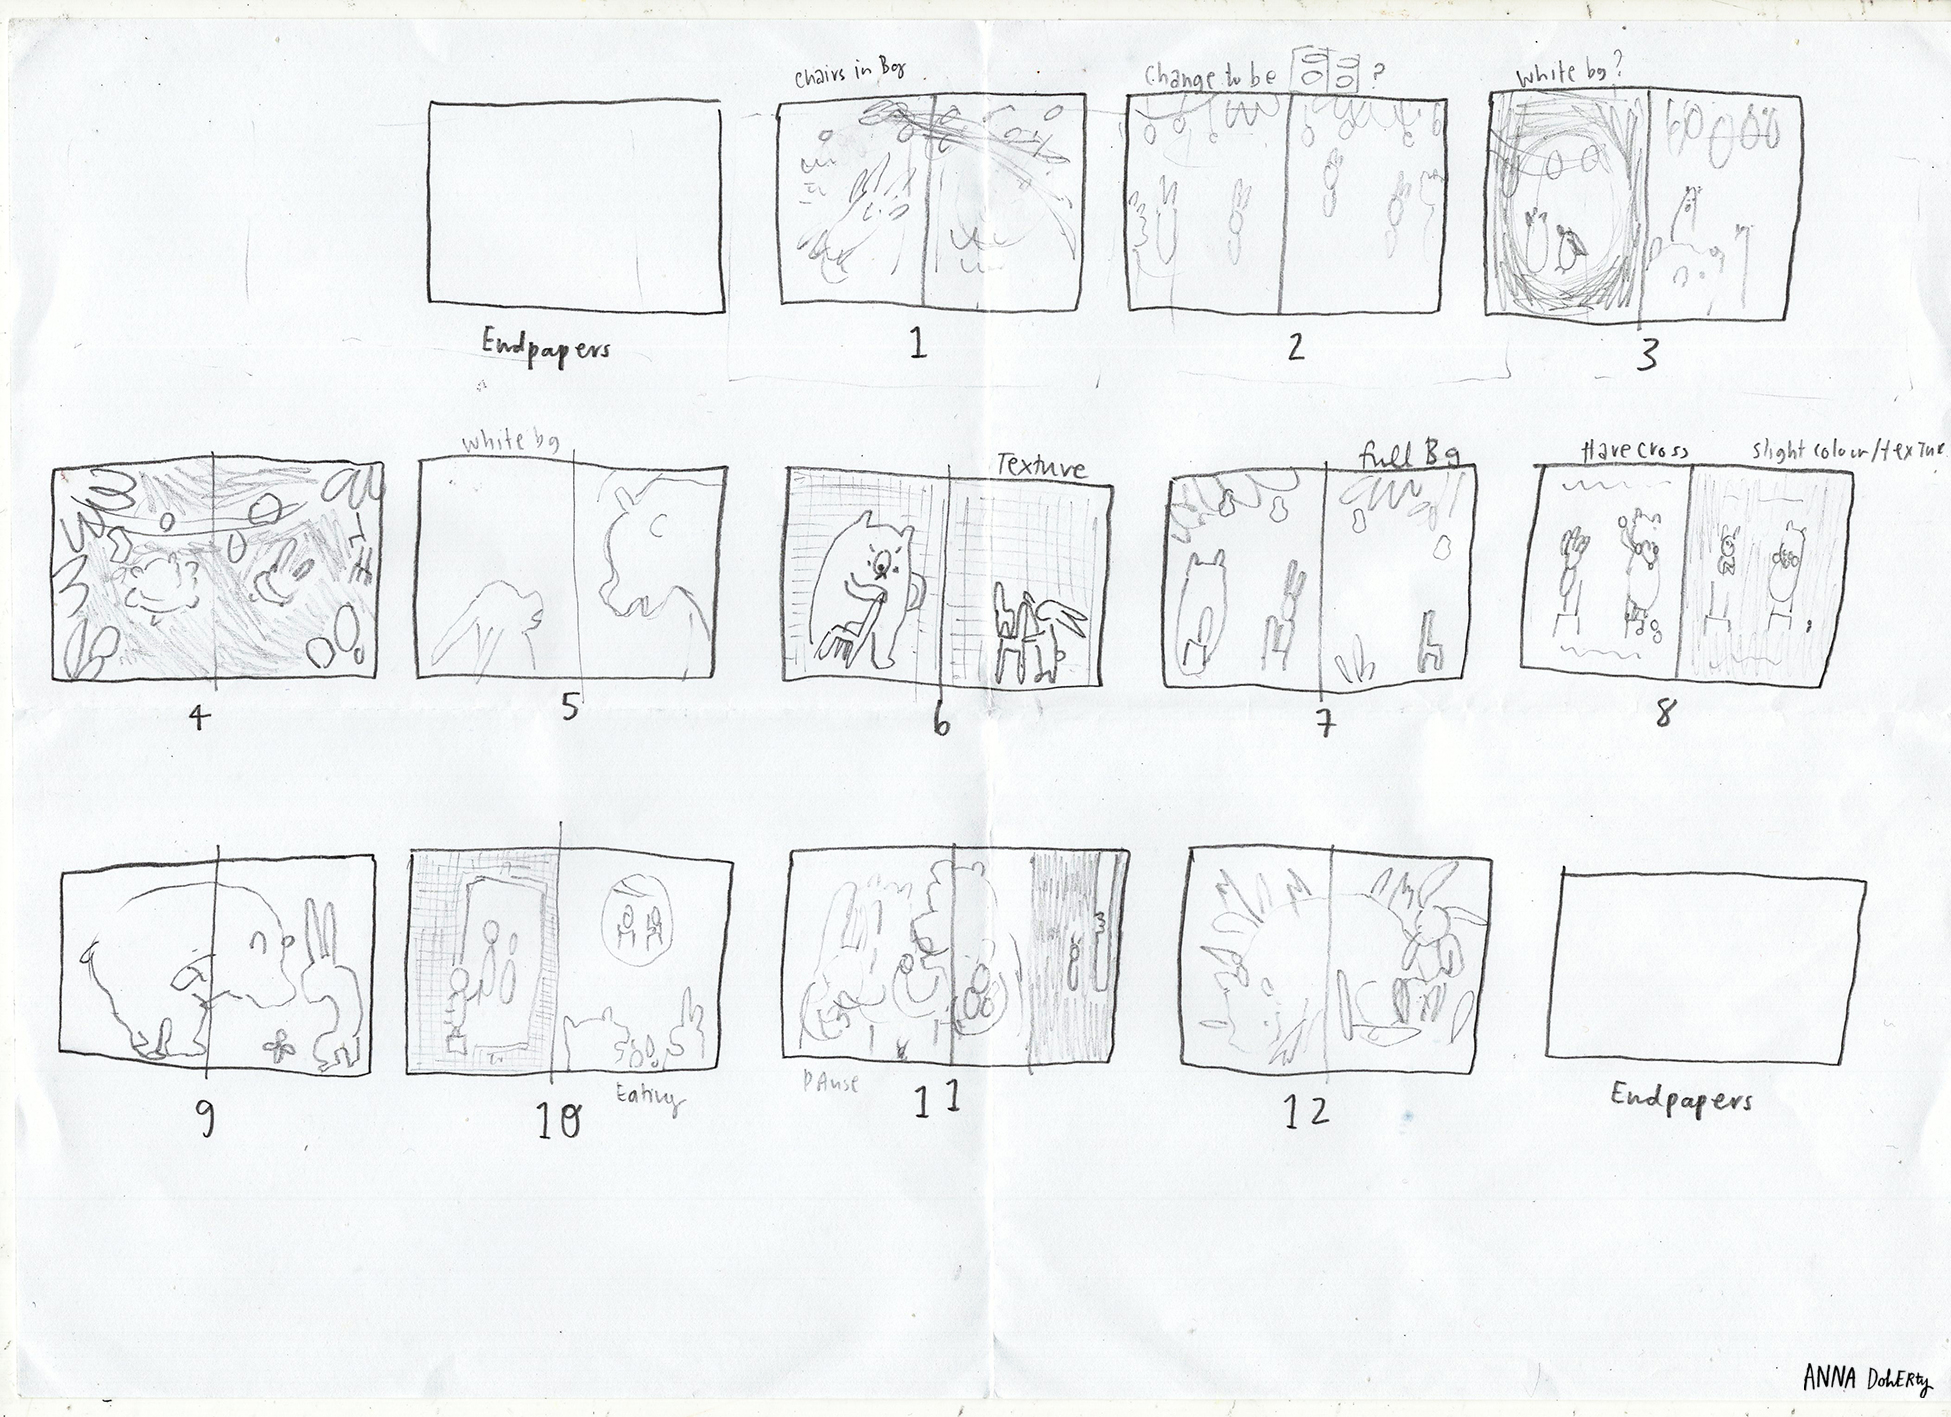 An example storyboard for a book. It shows a sequence of sketches investigating different compositions.